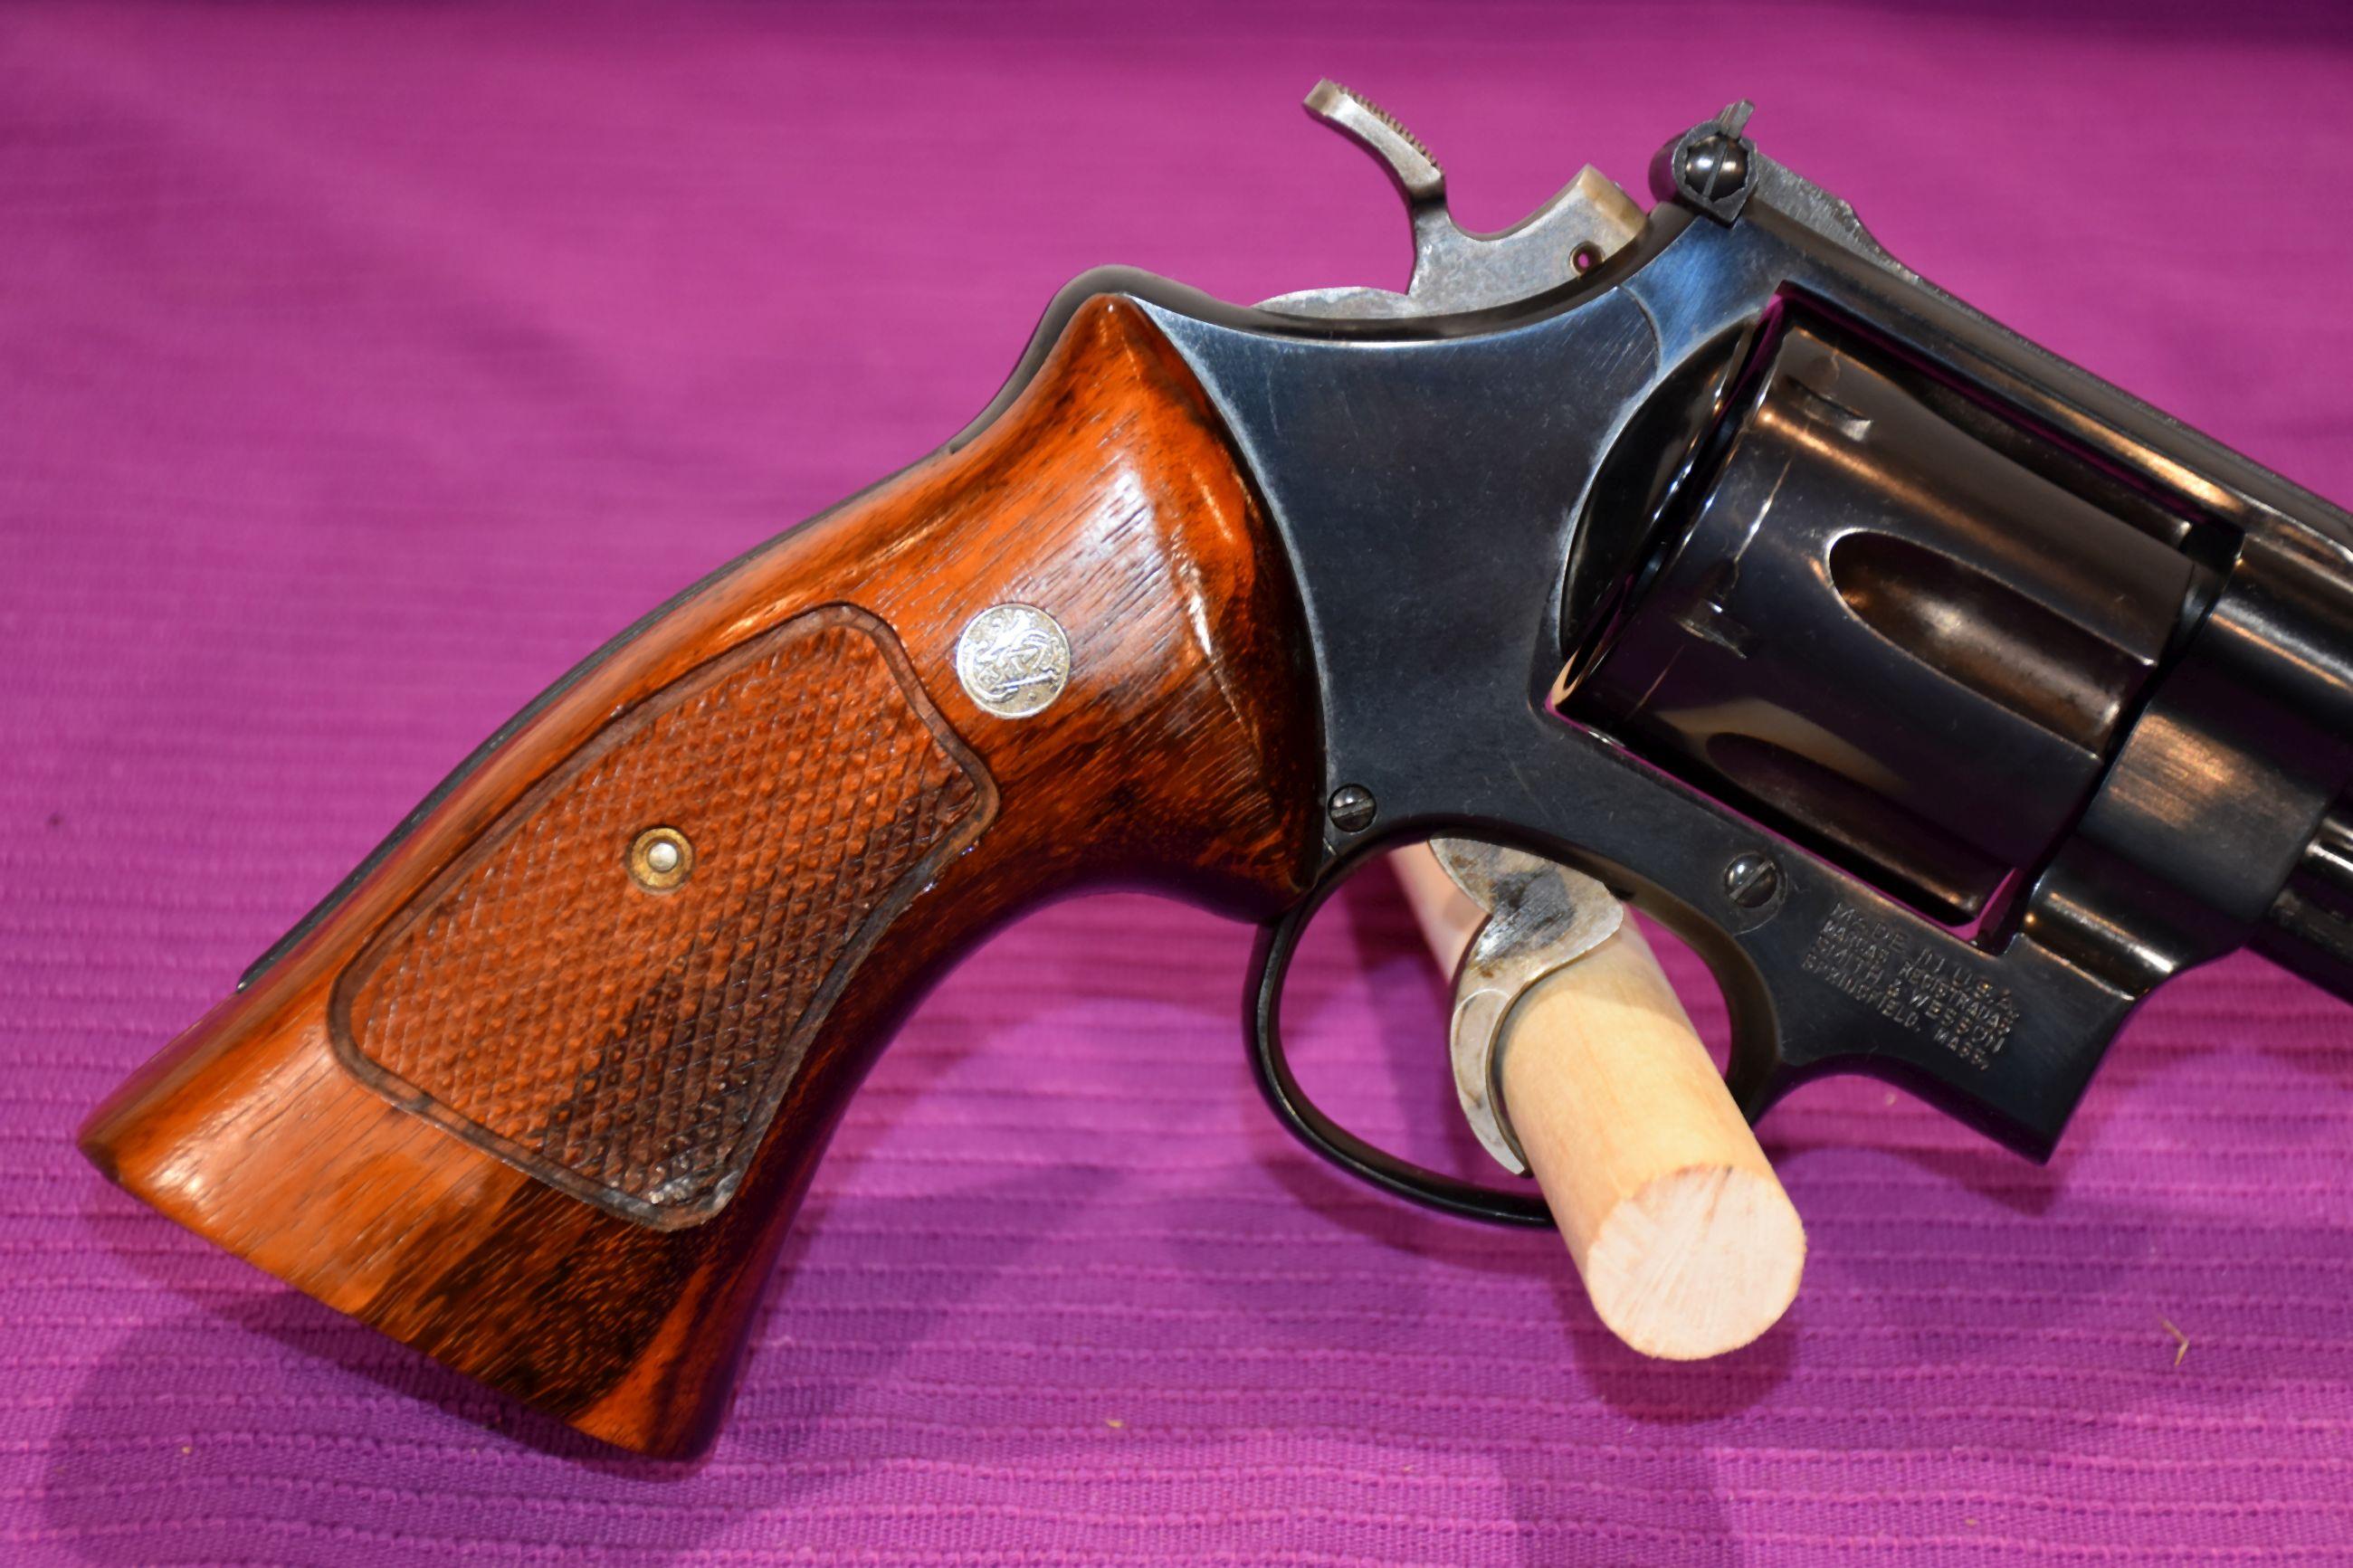 Smith And Wesson Model 57-3 Revolver, 41 Mag, 6" Barrel, SN: BF80194